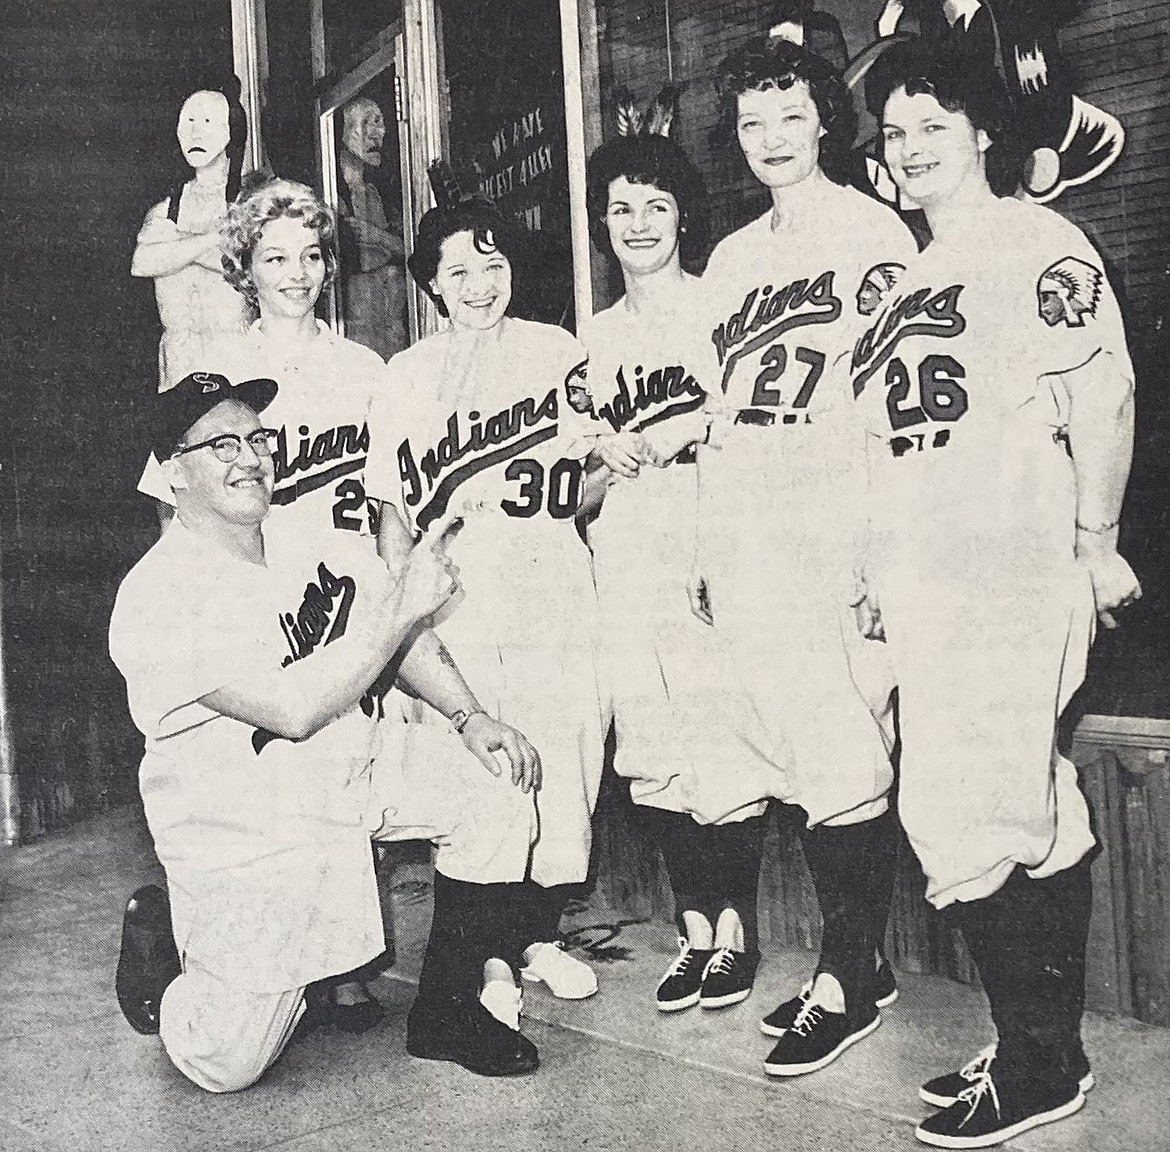 Manager John Freligh of the old Brunswick Café coaches waitresses dressed in Spokane Indians uniforms to promote the Spokane team. Waitresses are, from left, Bonnie Currier, Frances Crider, Babe Williams, queen candidate Pat Stephenson and Sharon Eilers.